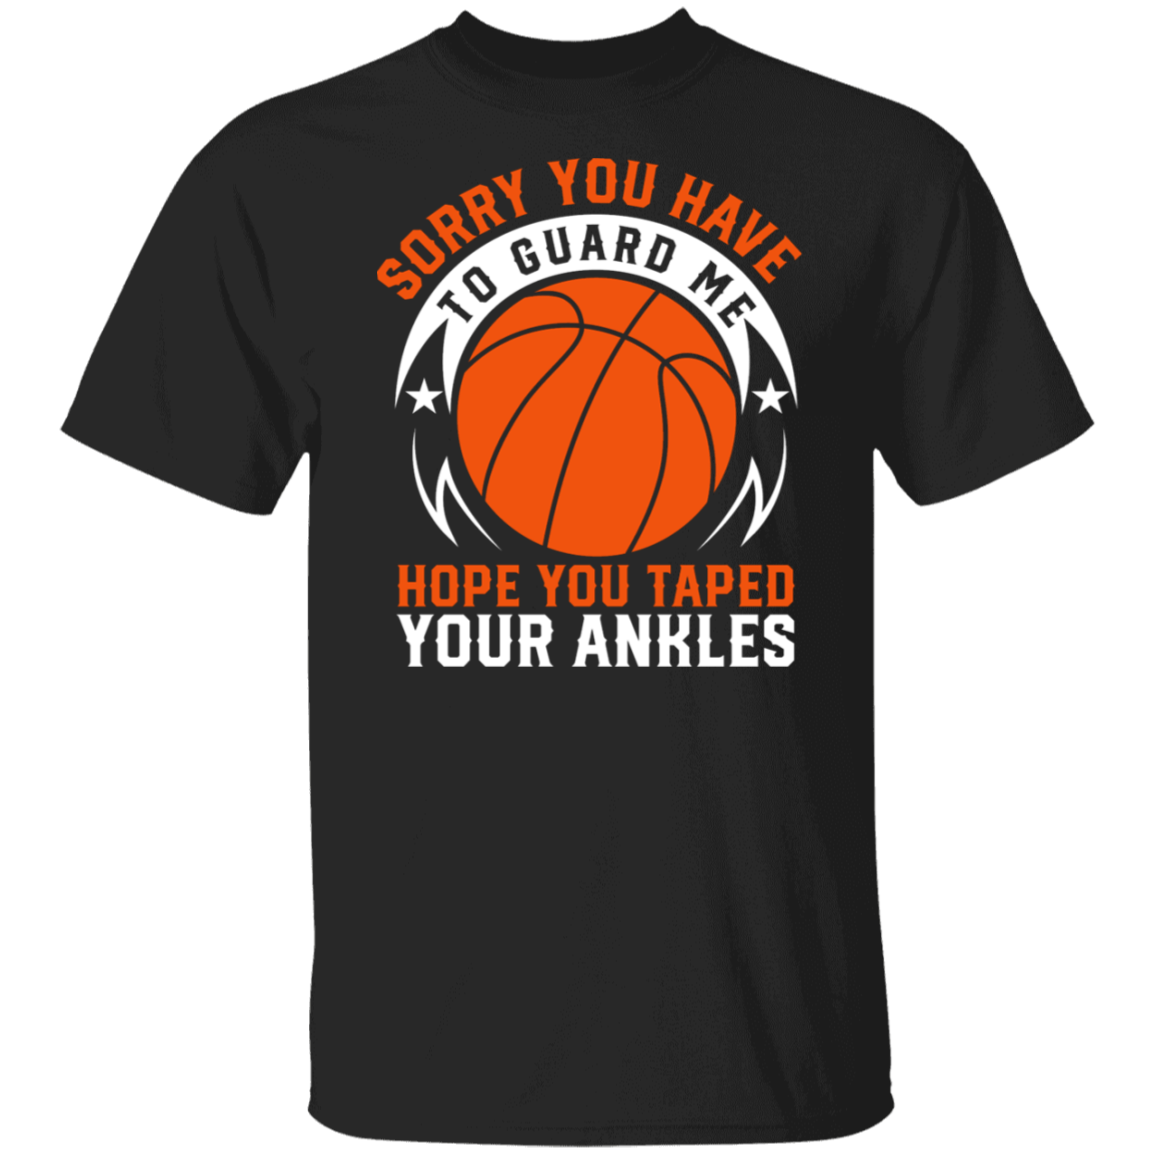 Sorry you Have To Guard Me T-Shirt